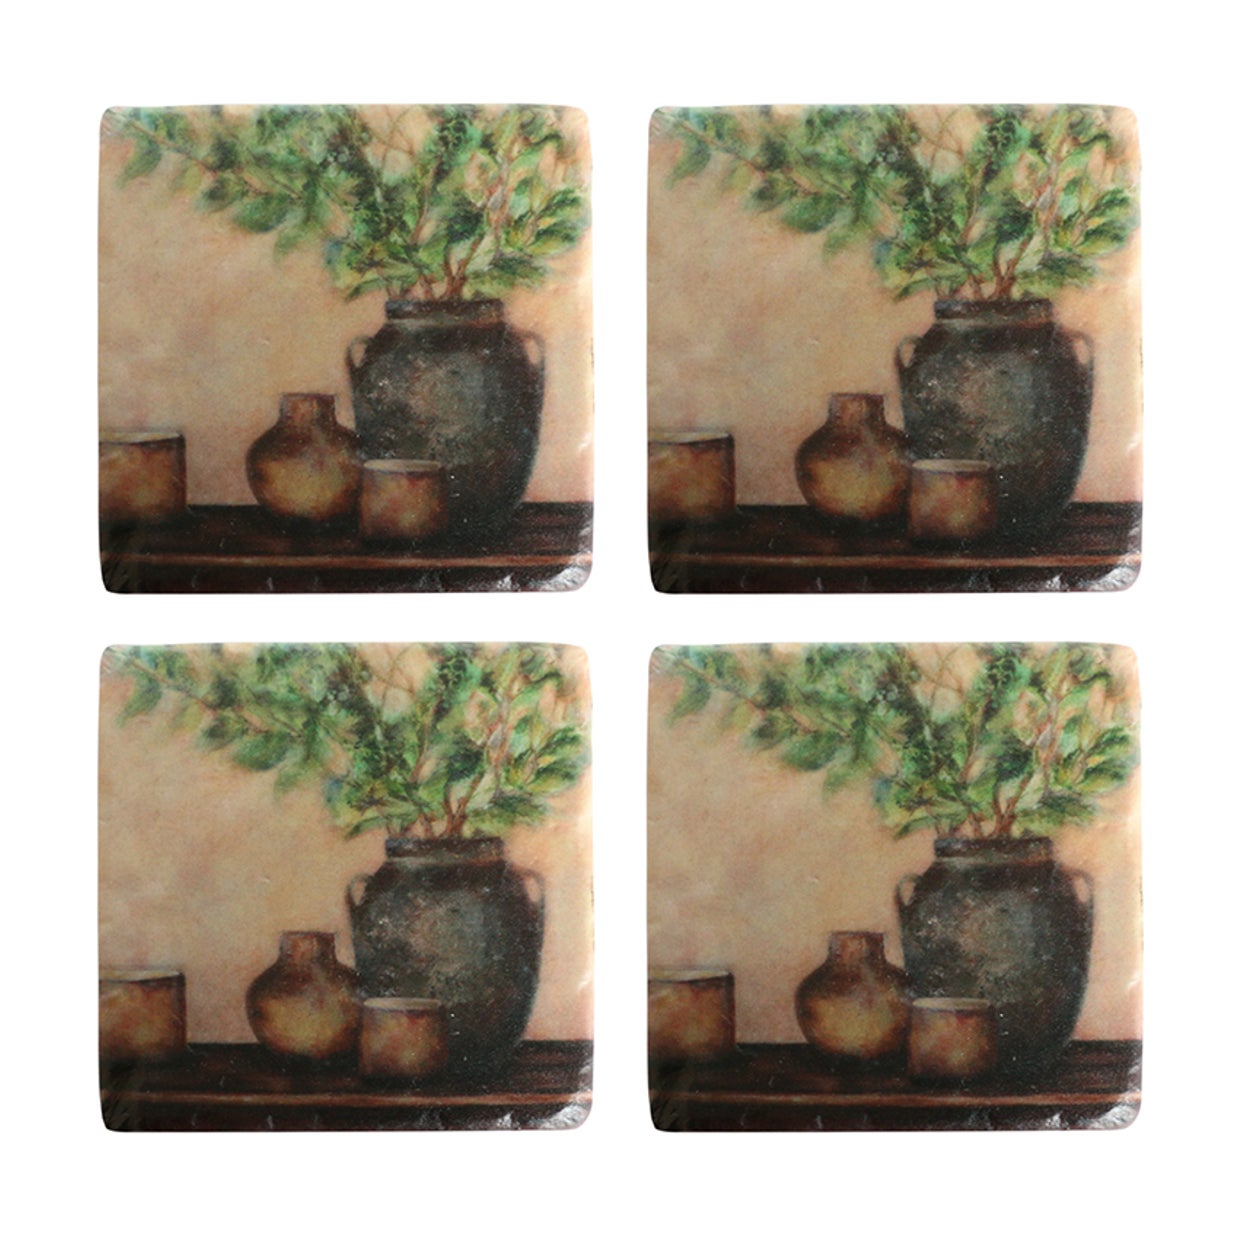 TUSCAN COASTER SETS (2 SETS OF 4 PIECES)